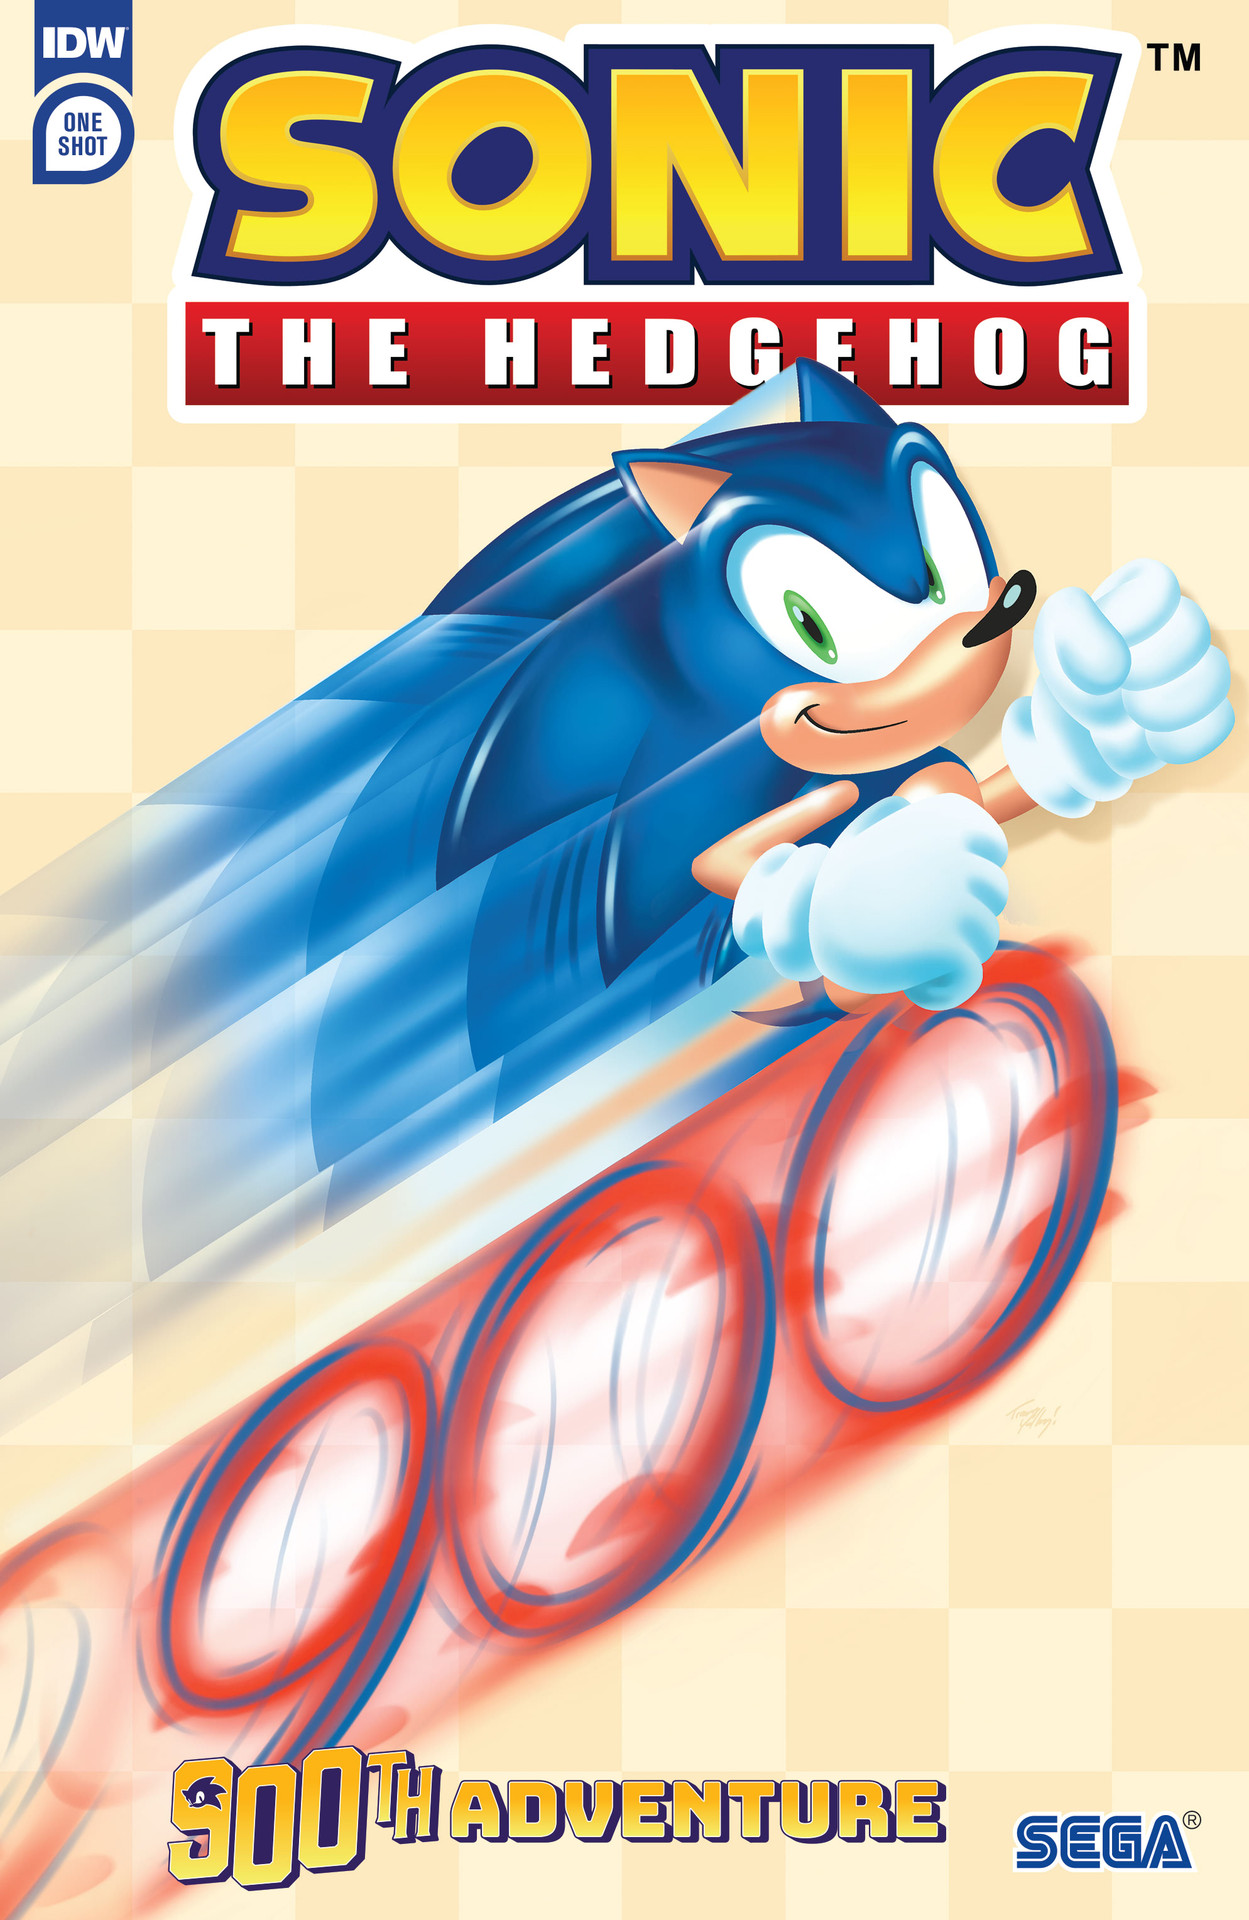 The Sonic 3 logo looks like a big shoutout to one of the hedgehog's most  beloved games